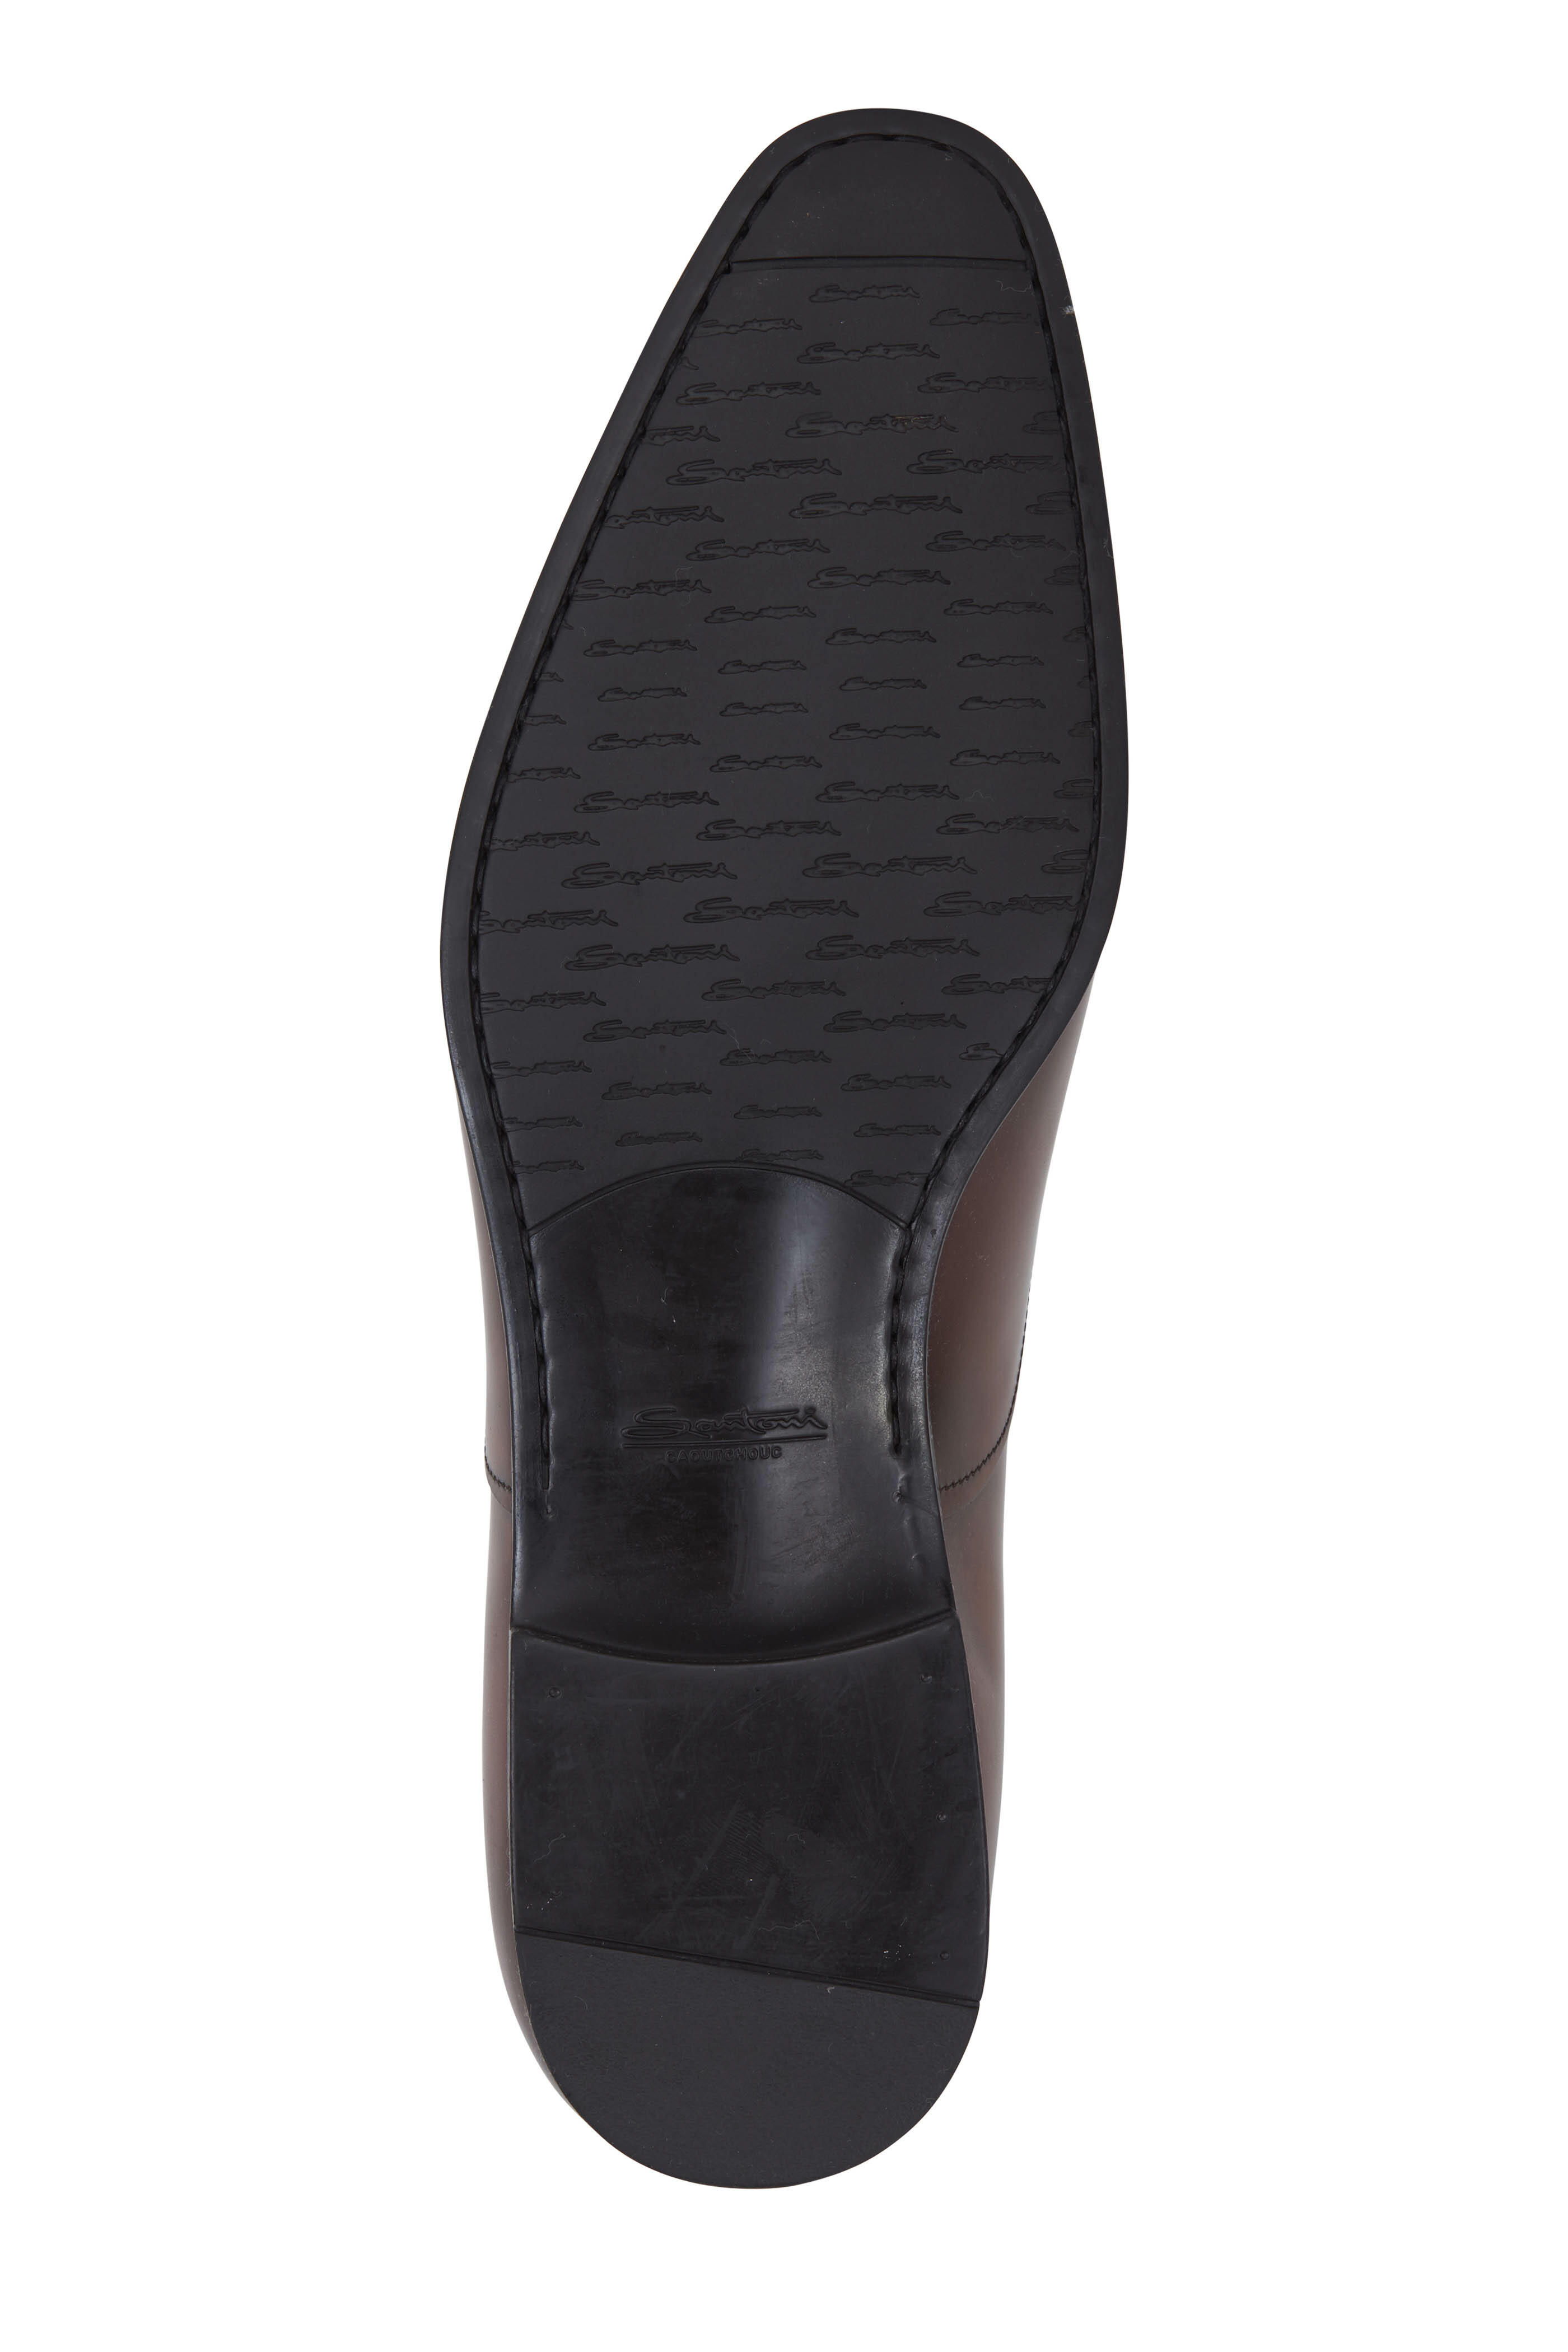 Santoni - Induct Simon Brown Leather Derby Shoe | Mitchell Stores